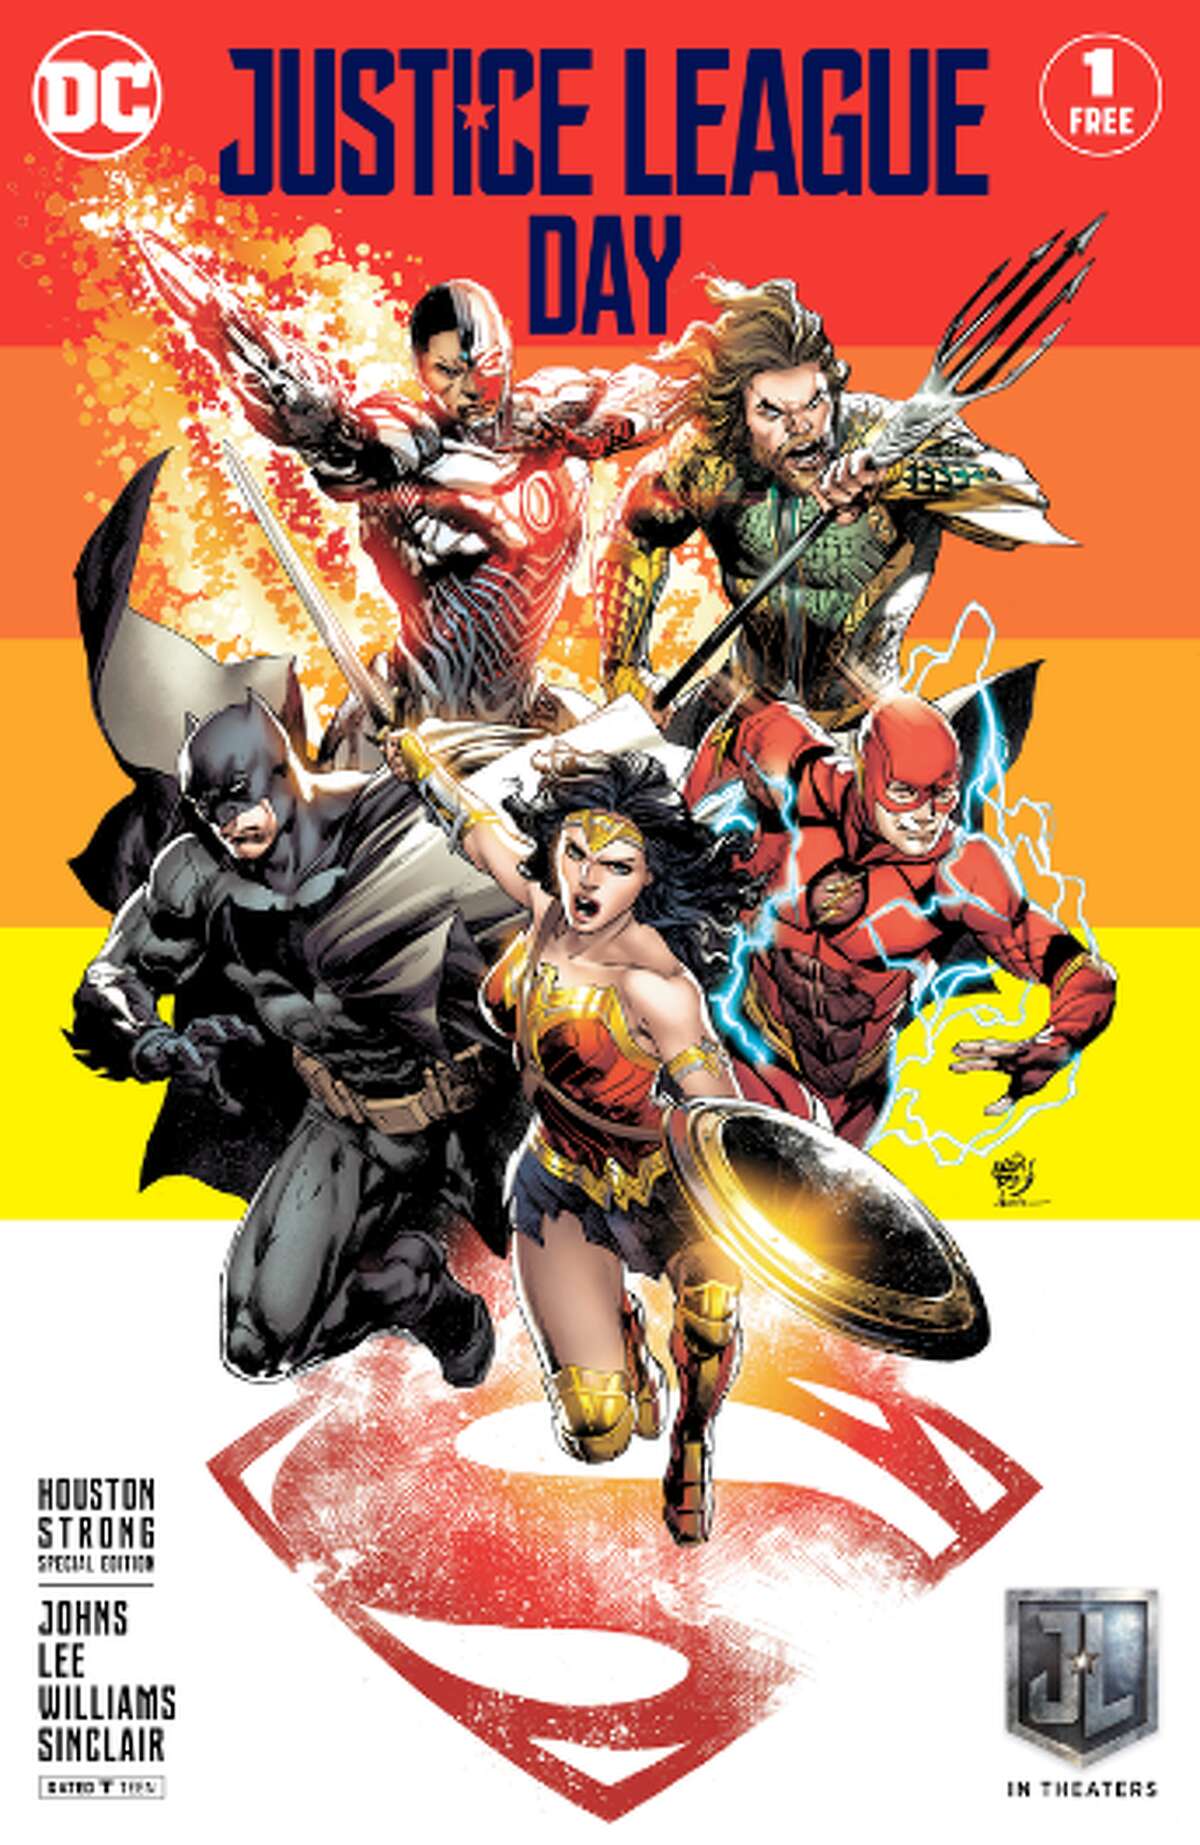 DC Comics offers Astros tribute for Justice League Day